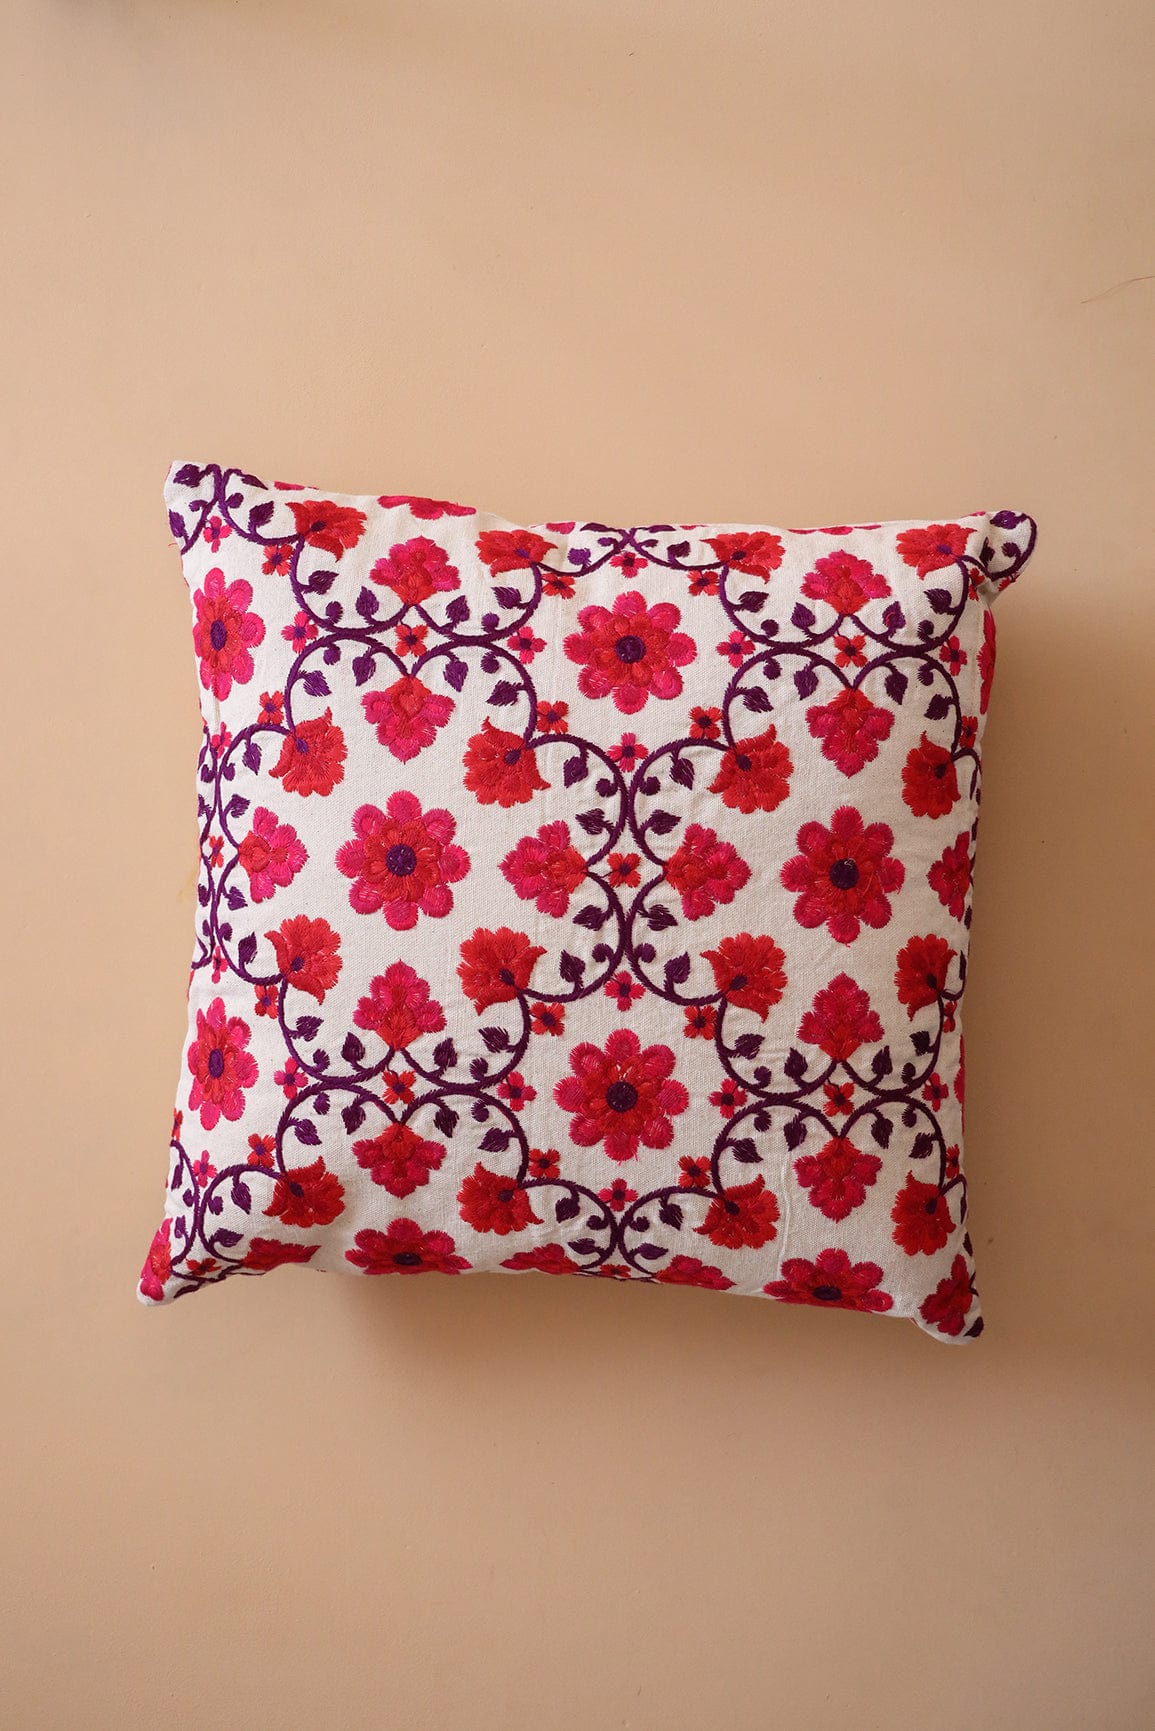 doeraa Red and Pink Floral Embroidery on off white cotton Cushion Cover (16*16 inches)